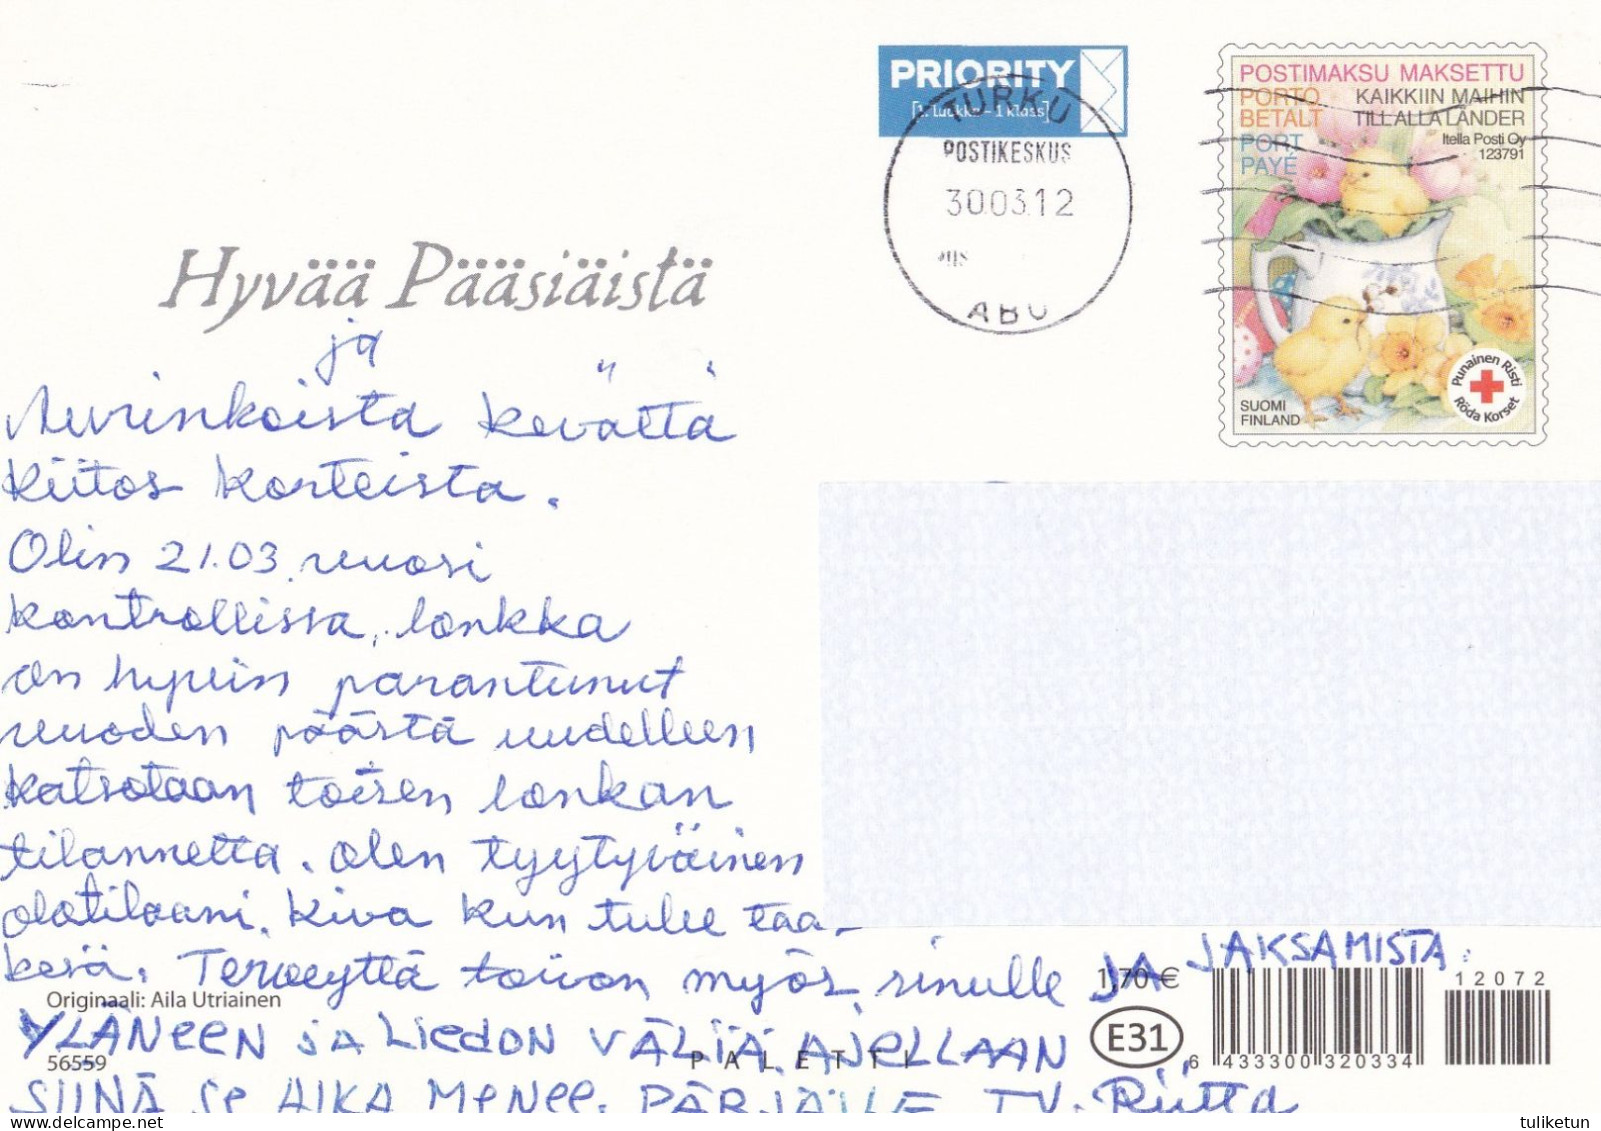 Postal Stationery - Girls Picking Up Willows - Bunny - Red Cross 2012 - Suomi Finland - Postage Paid - Interi Postali